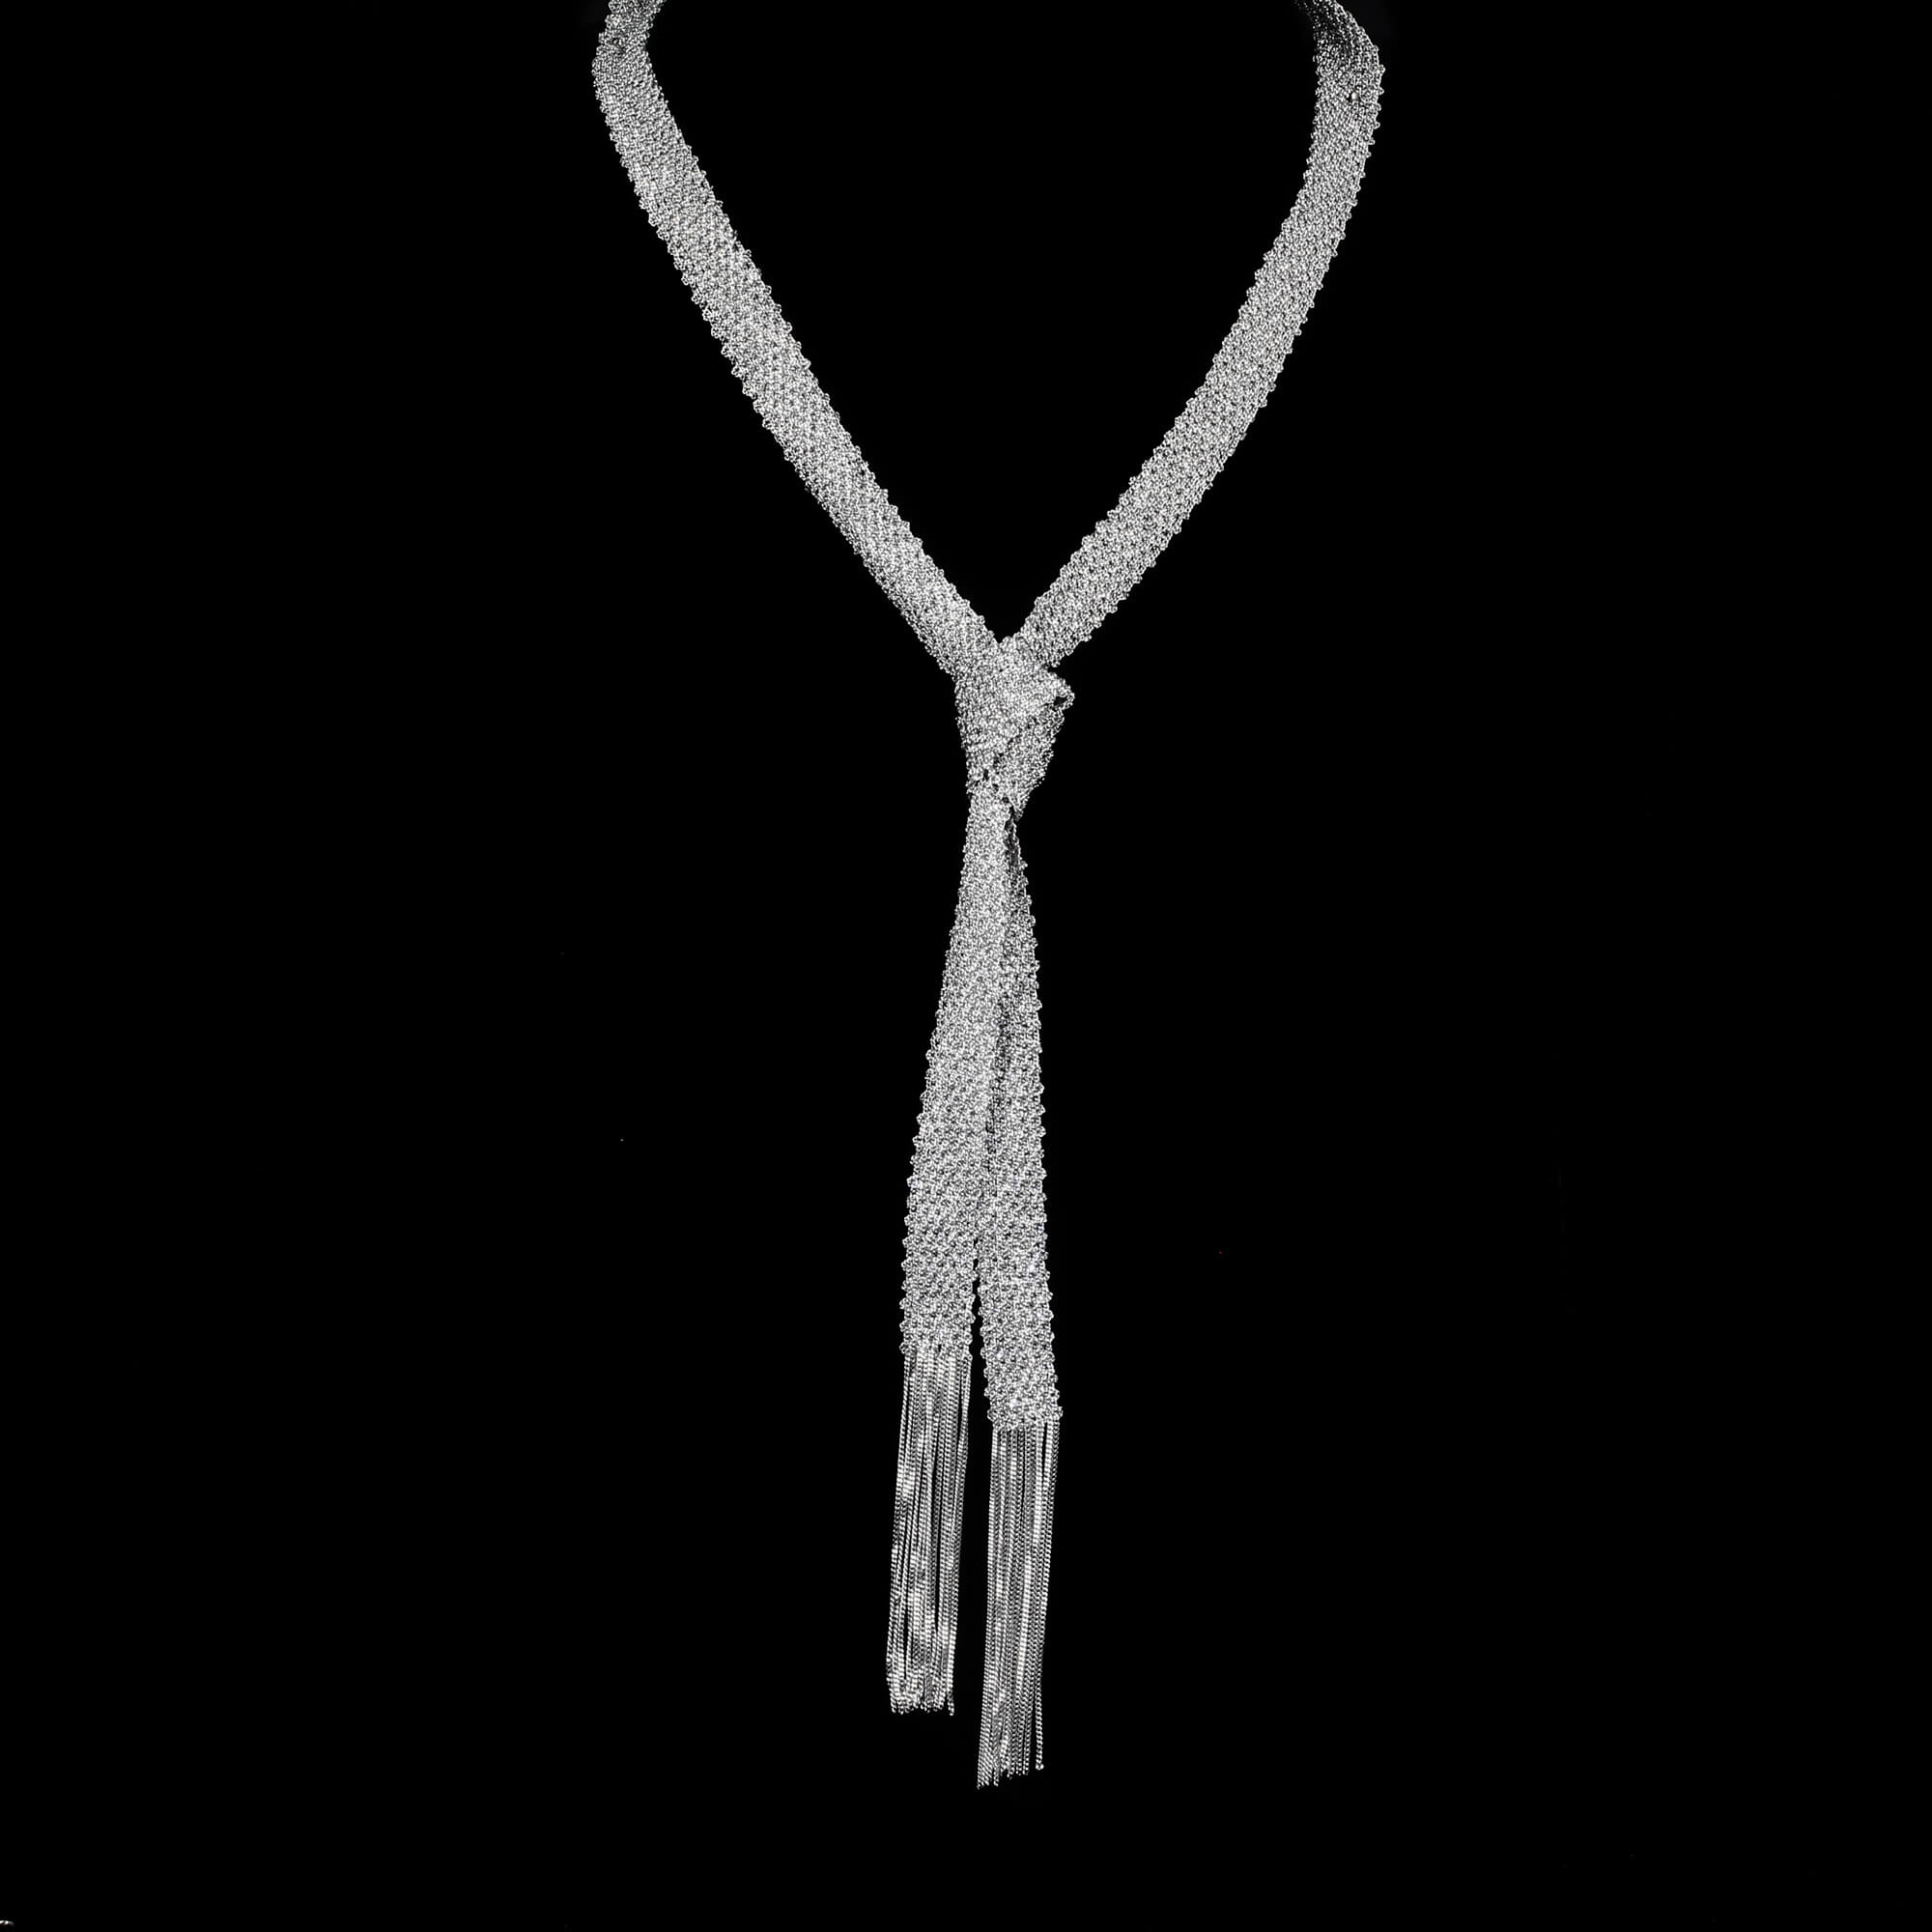 Silver scarf or interwoven chains